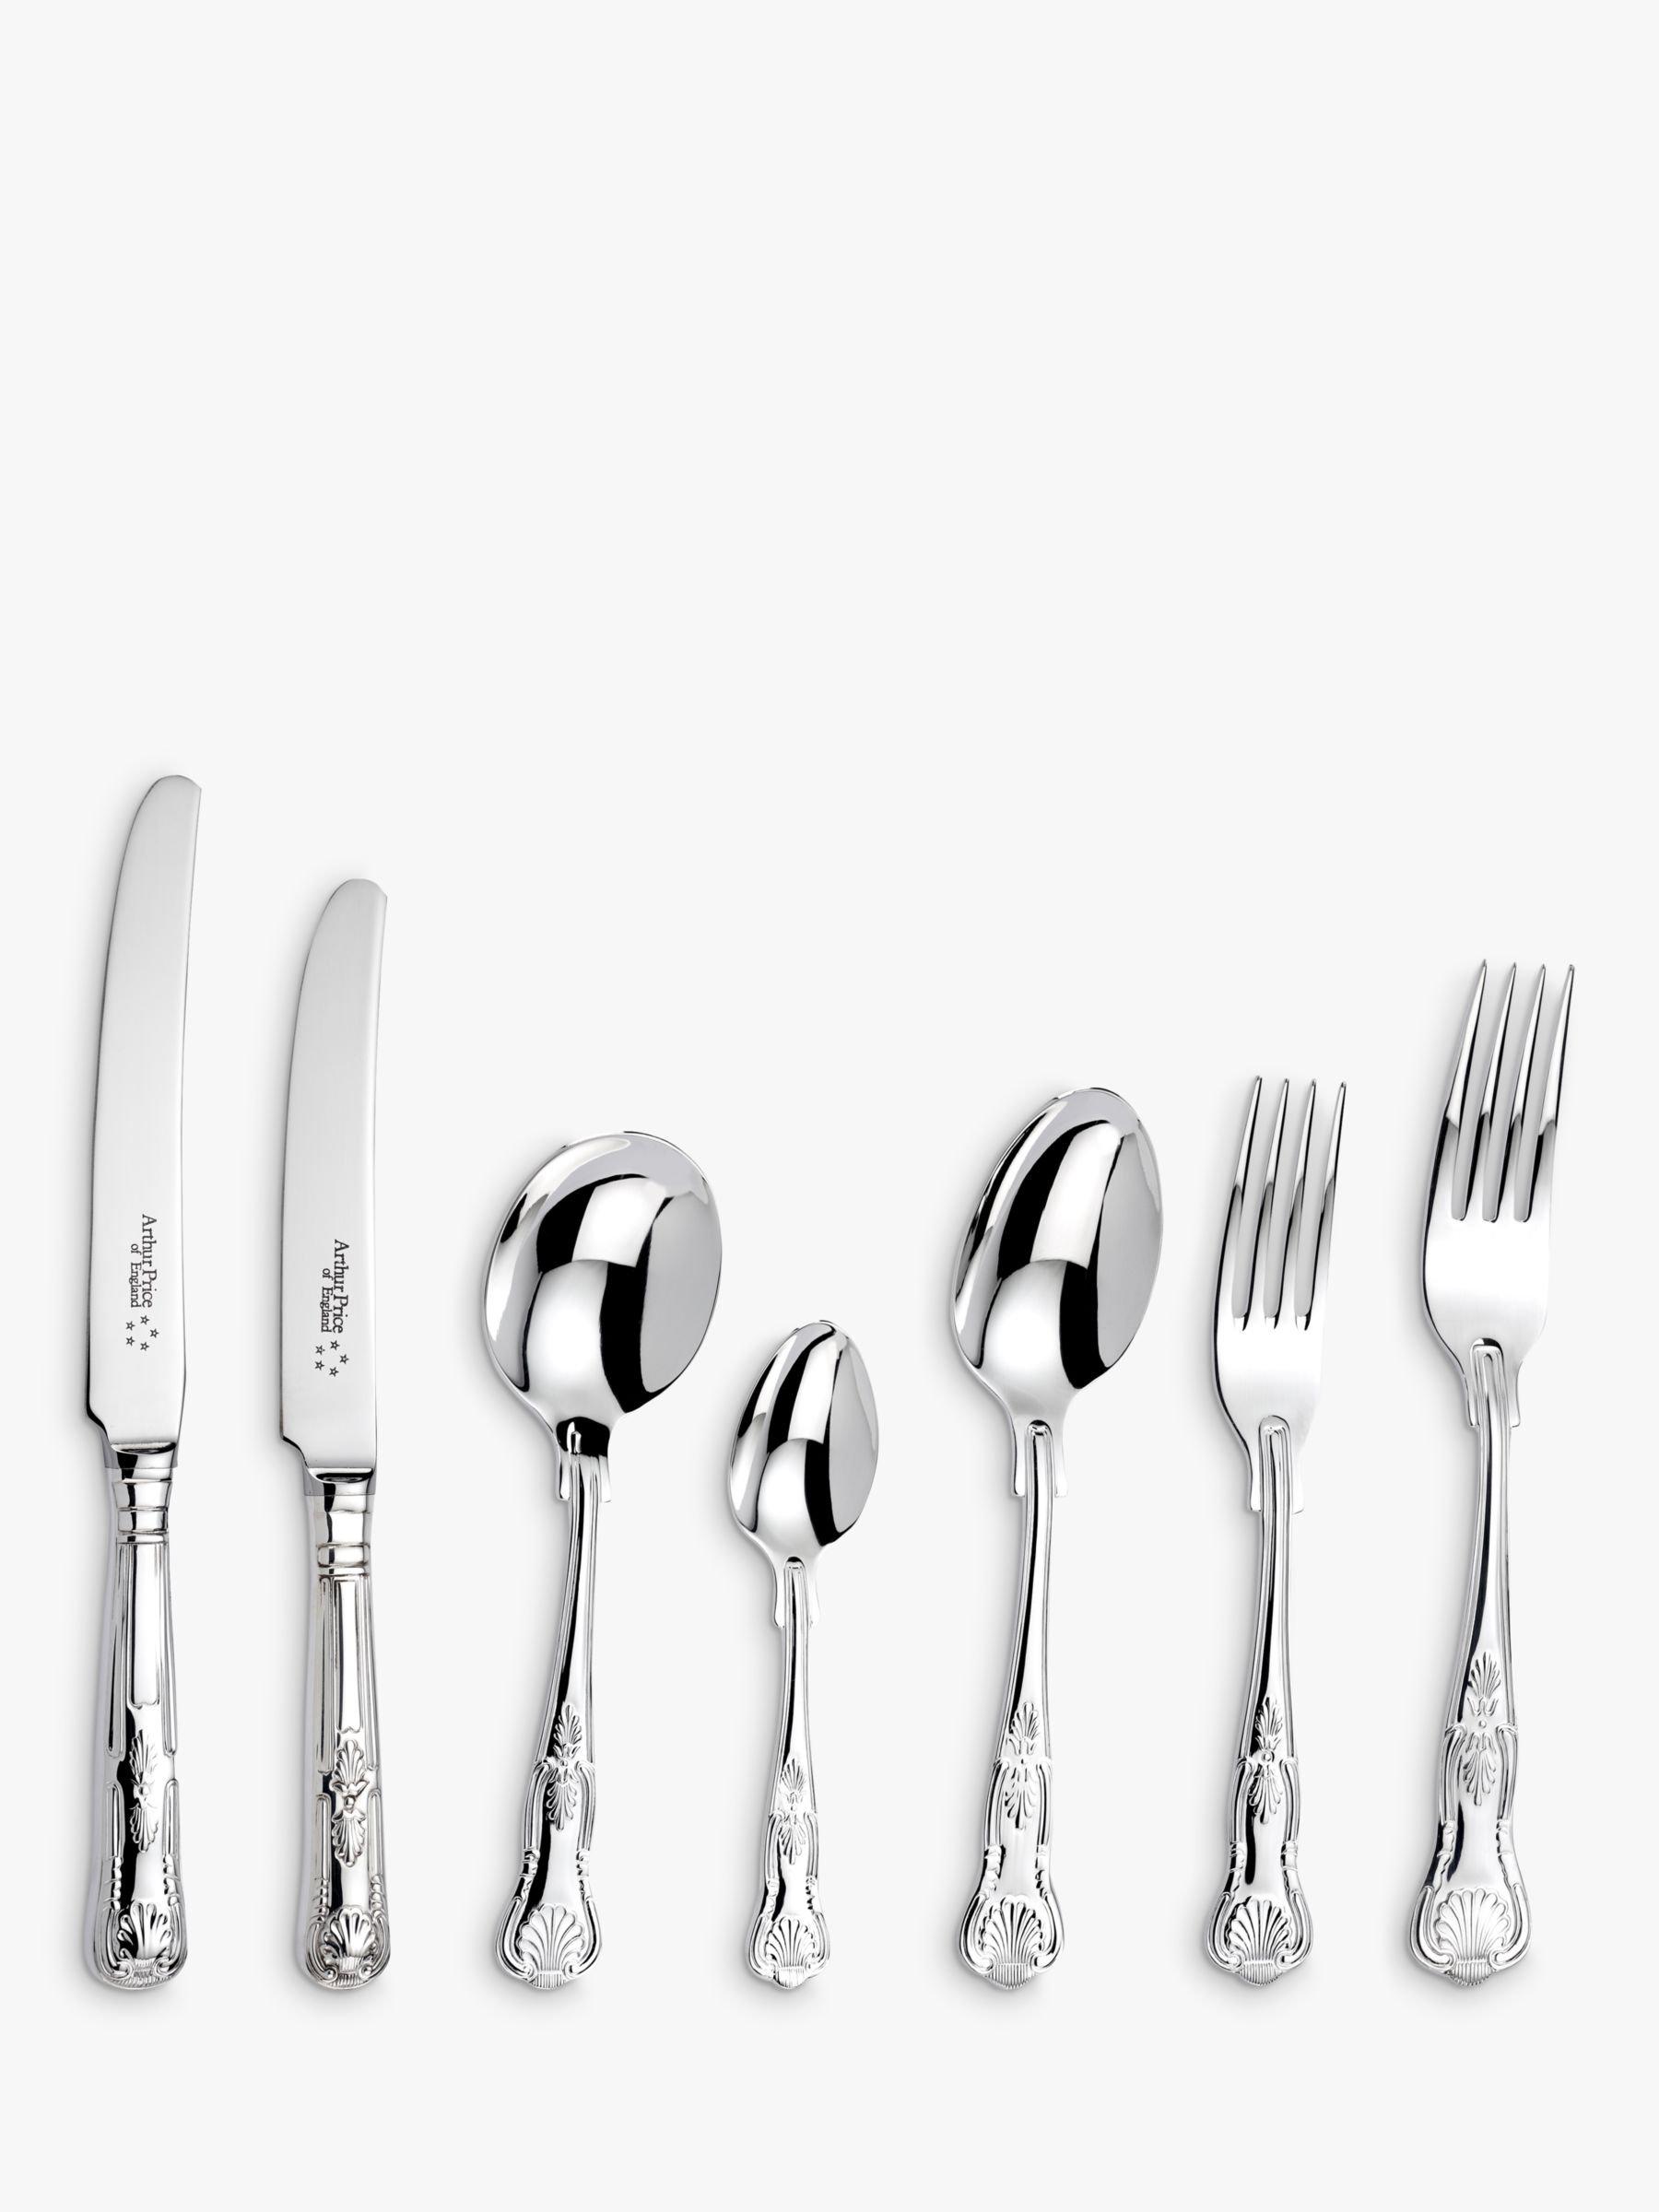 Arthur Price Kings Sovereign Silver Plated Cutlery Set, 7 Piece/1 Place Setting